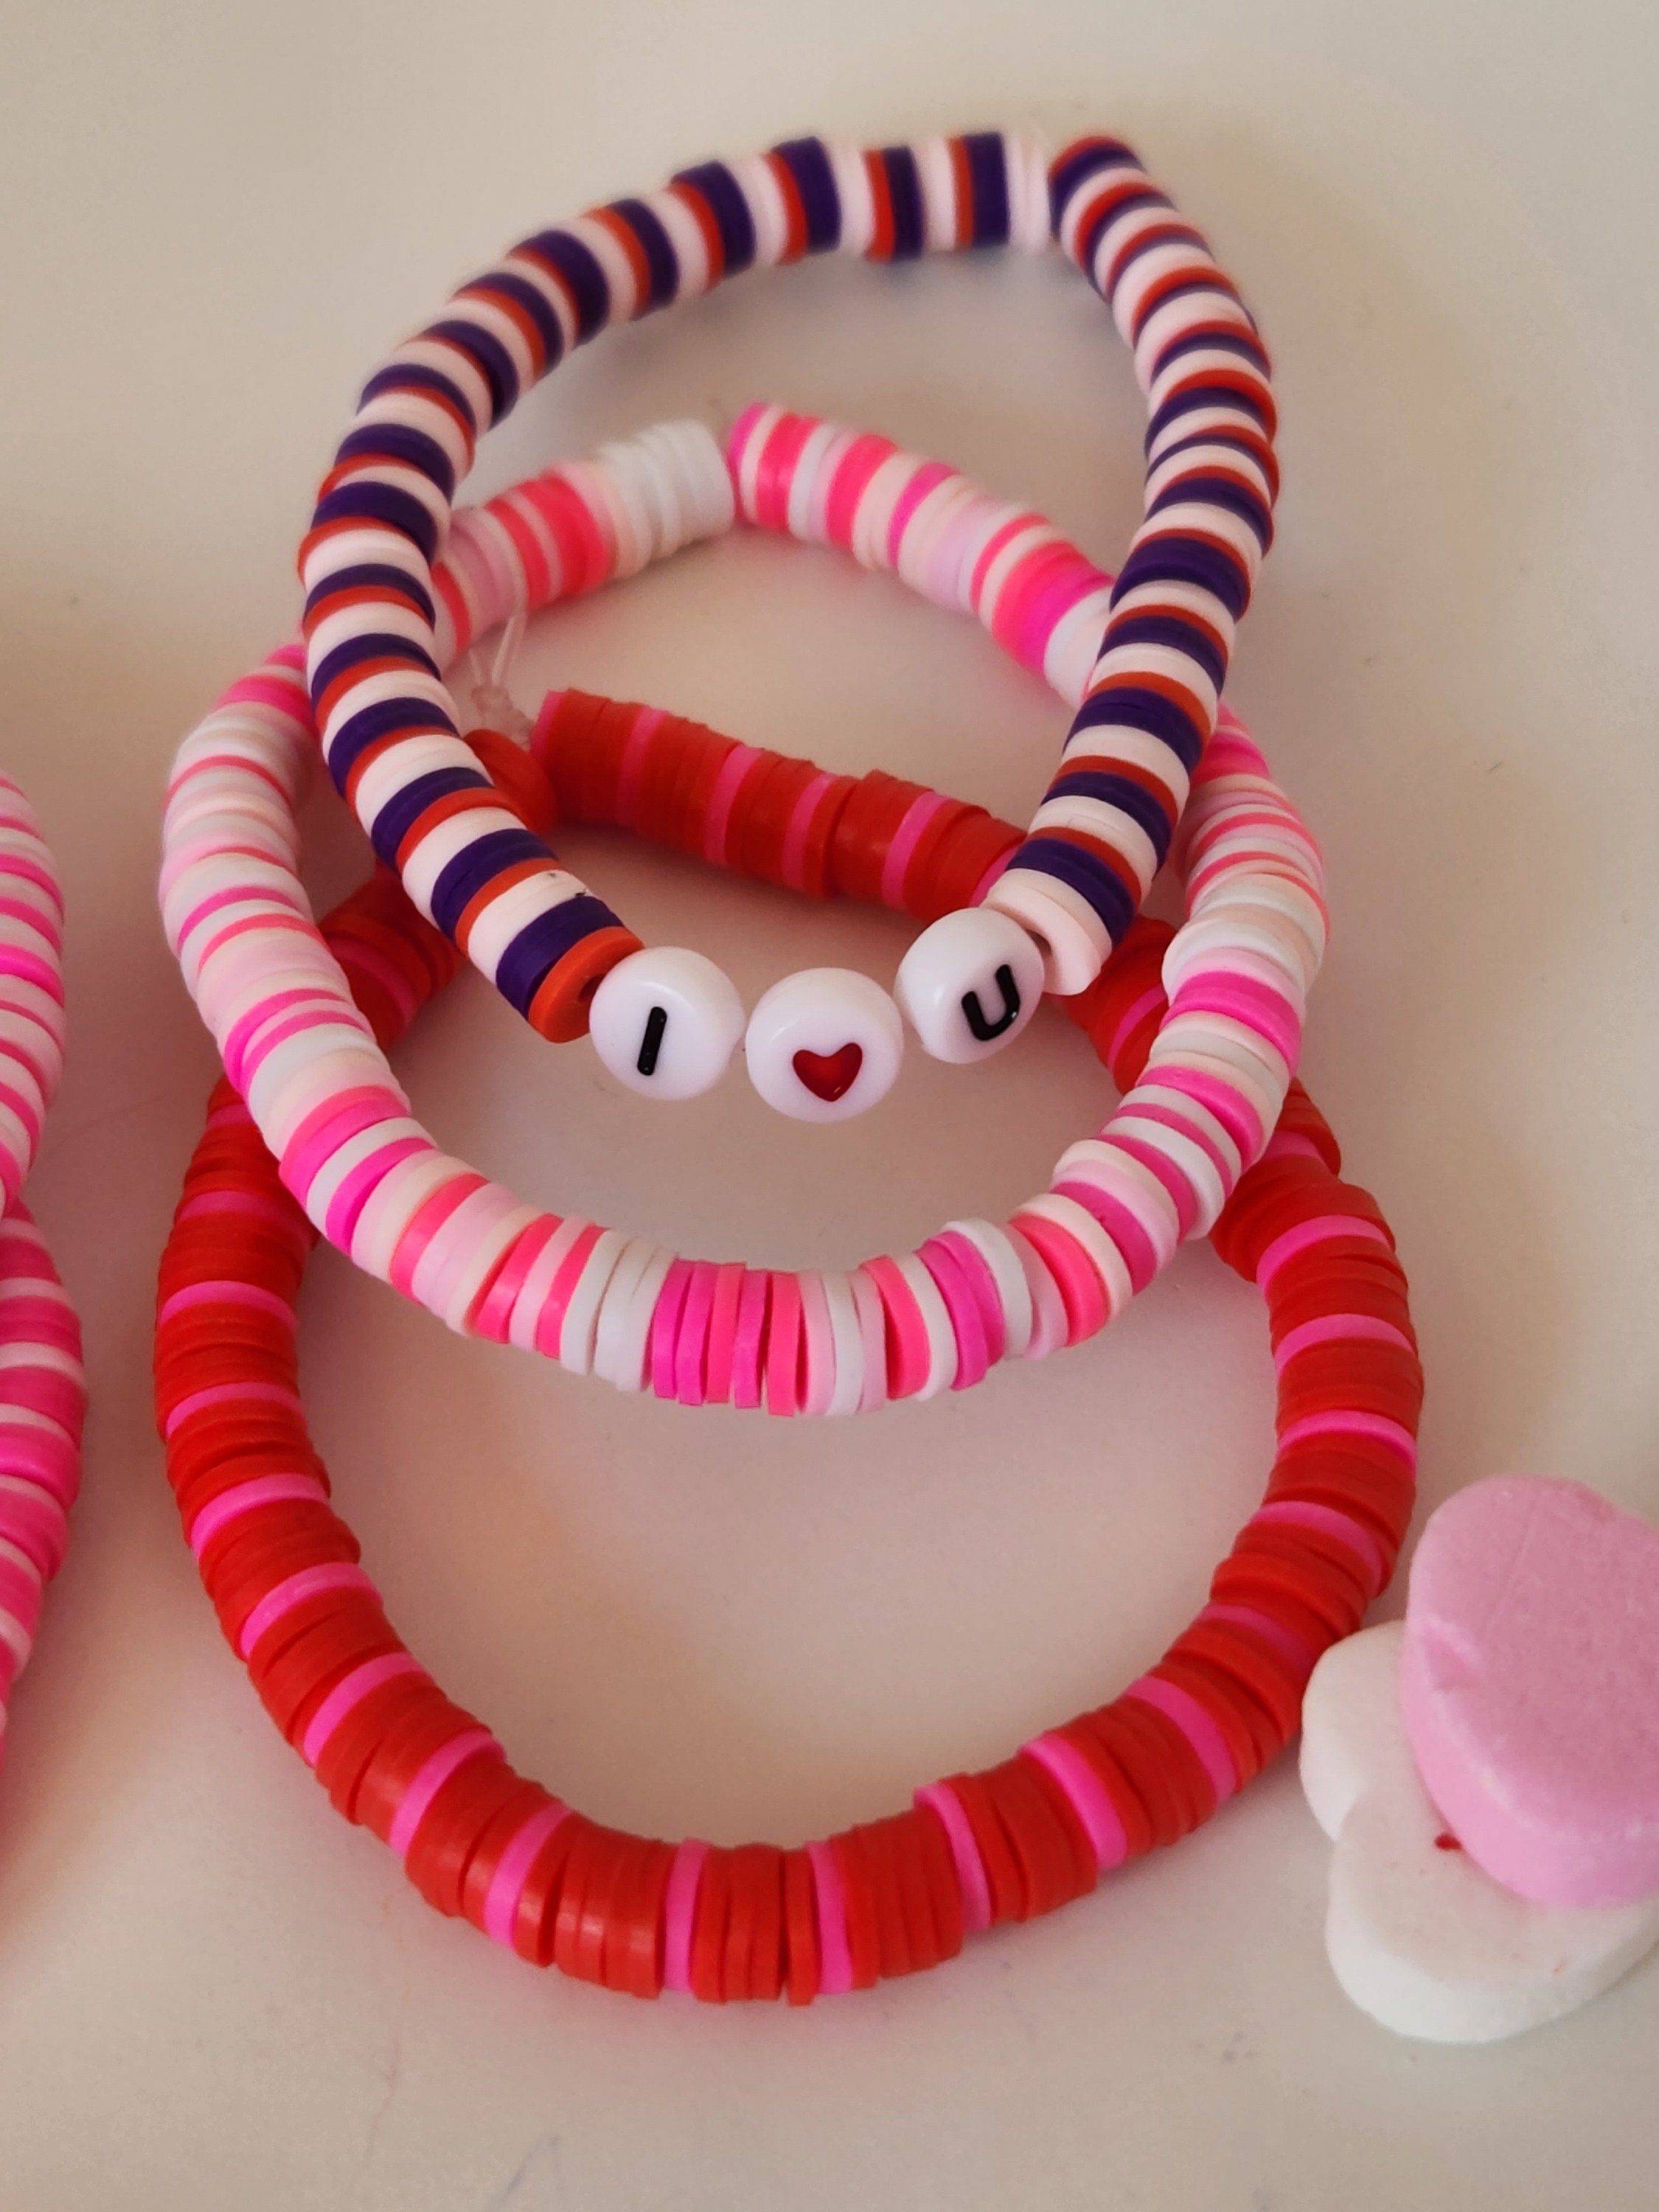 NVENF 3000PCS+ Valentine’s Day Clay Beads for Jewelry Making, Red Pink Polymer Clay Heishi Beads, Enamel Heart Charms for Bracelet Necklace Earrings